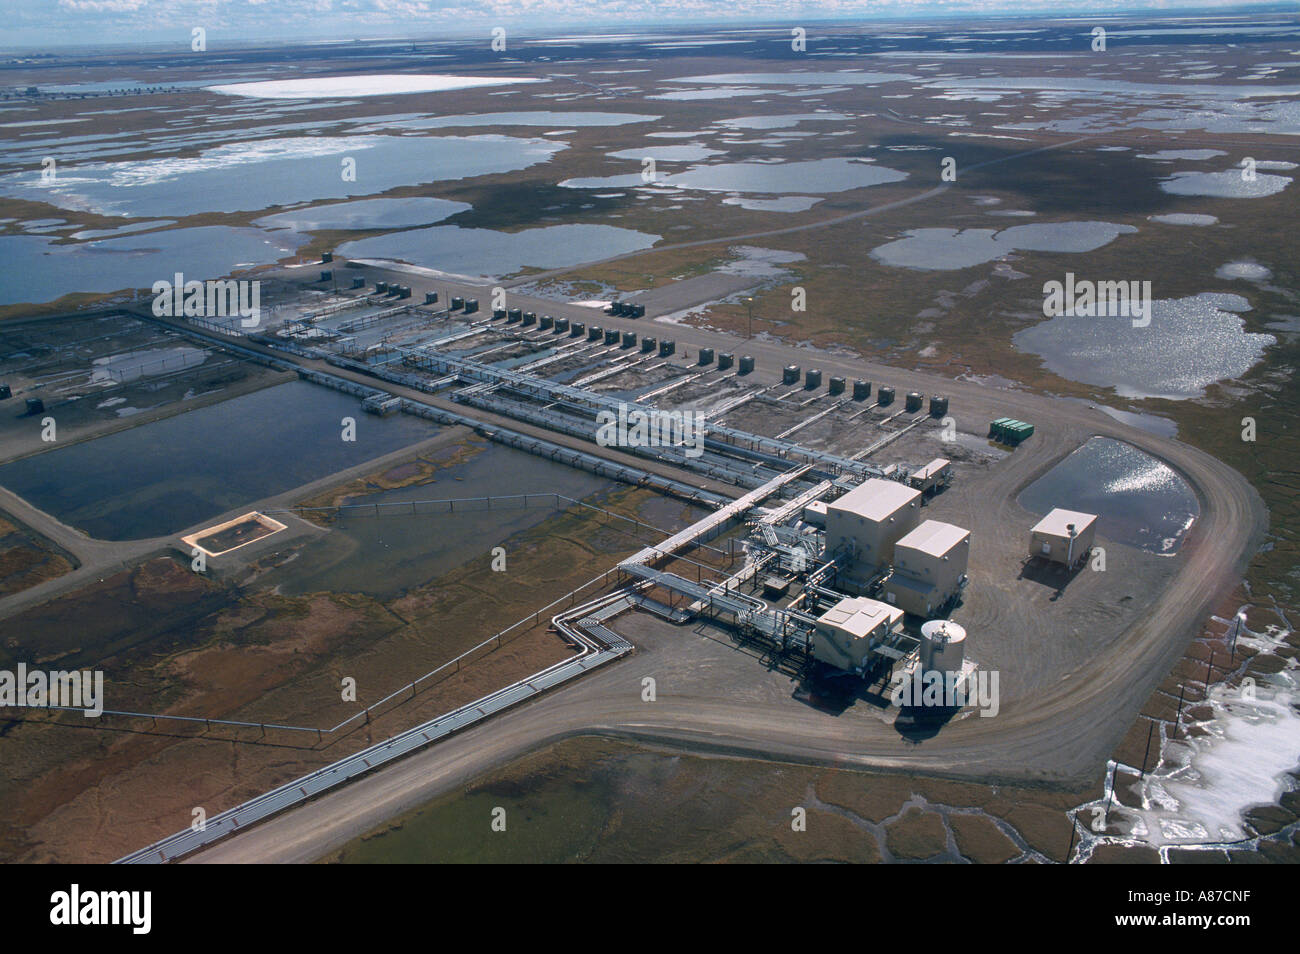 Aerial view of Alaskan oil fields and facilities in Prudhoe Bay Alaska Stock Photo